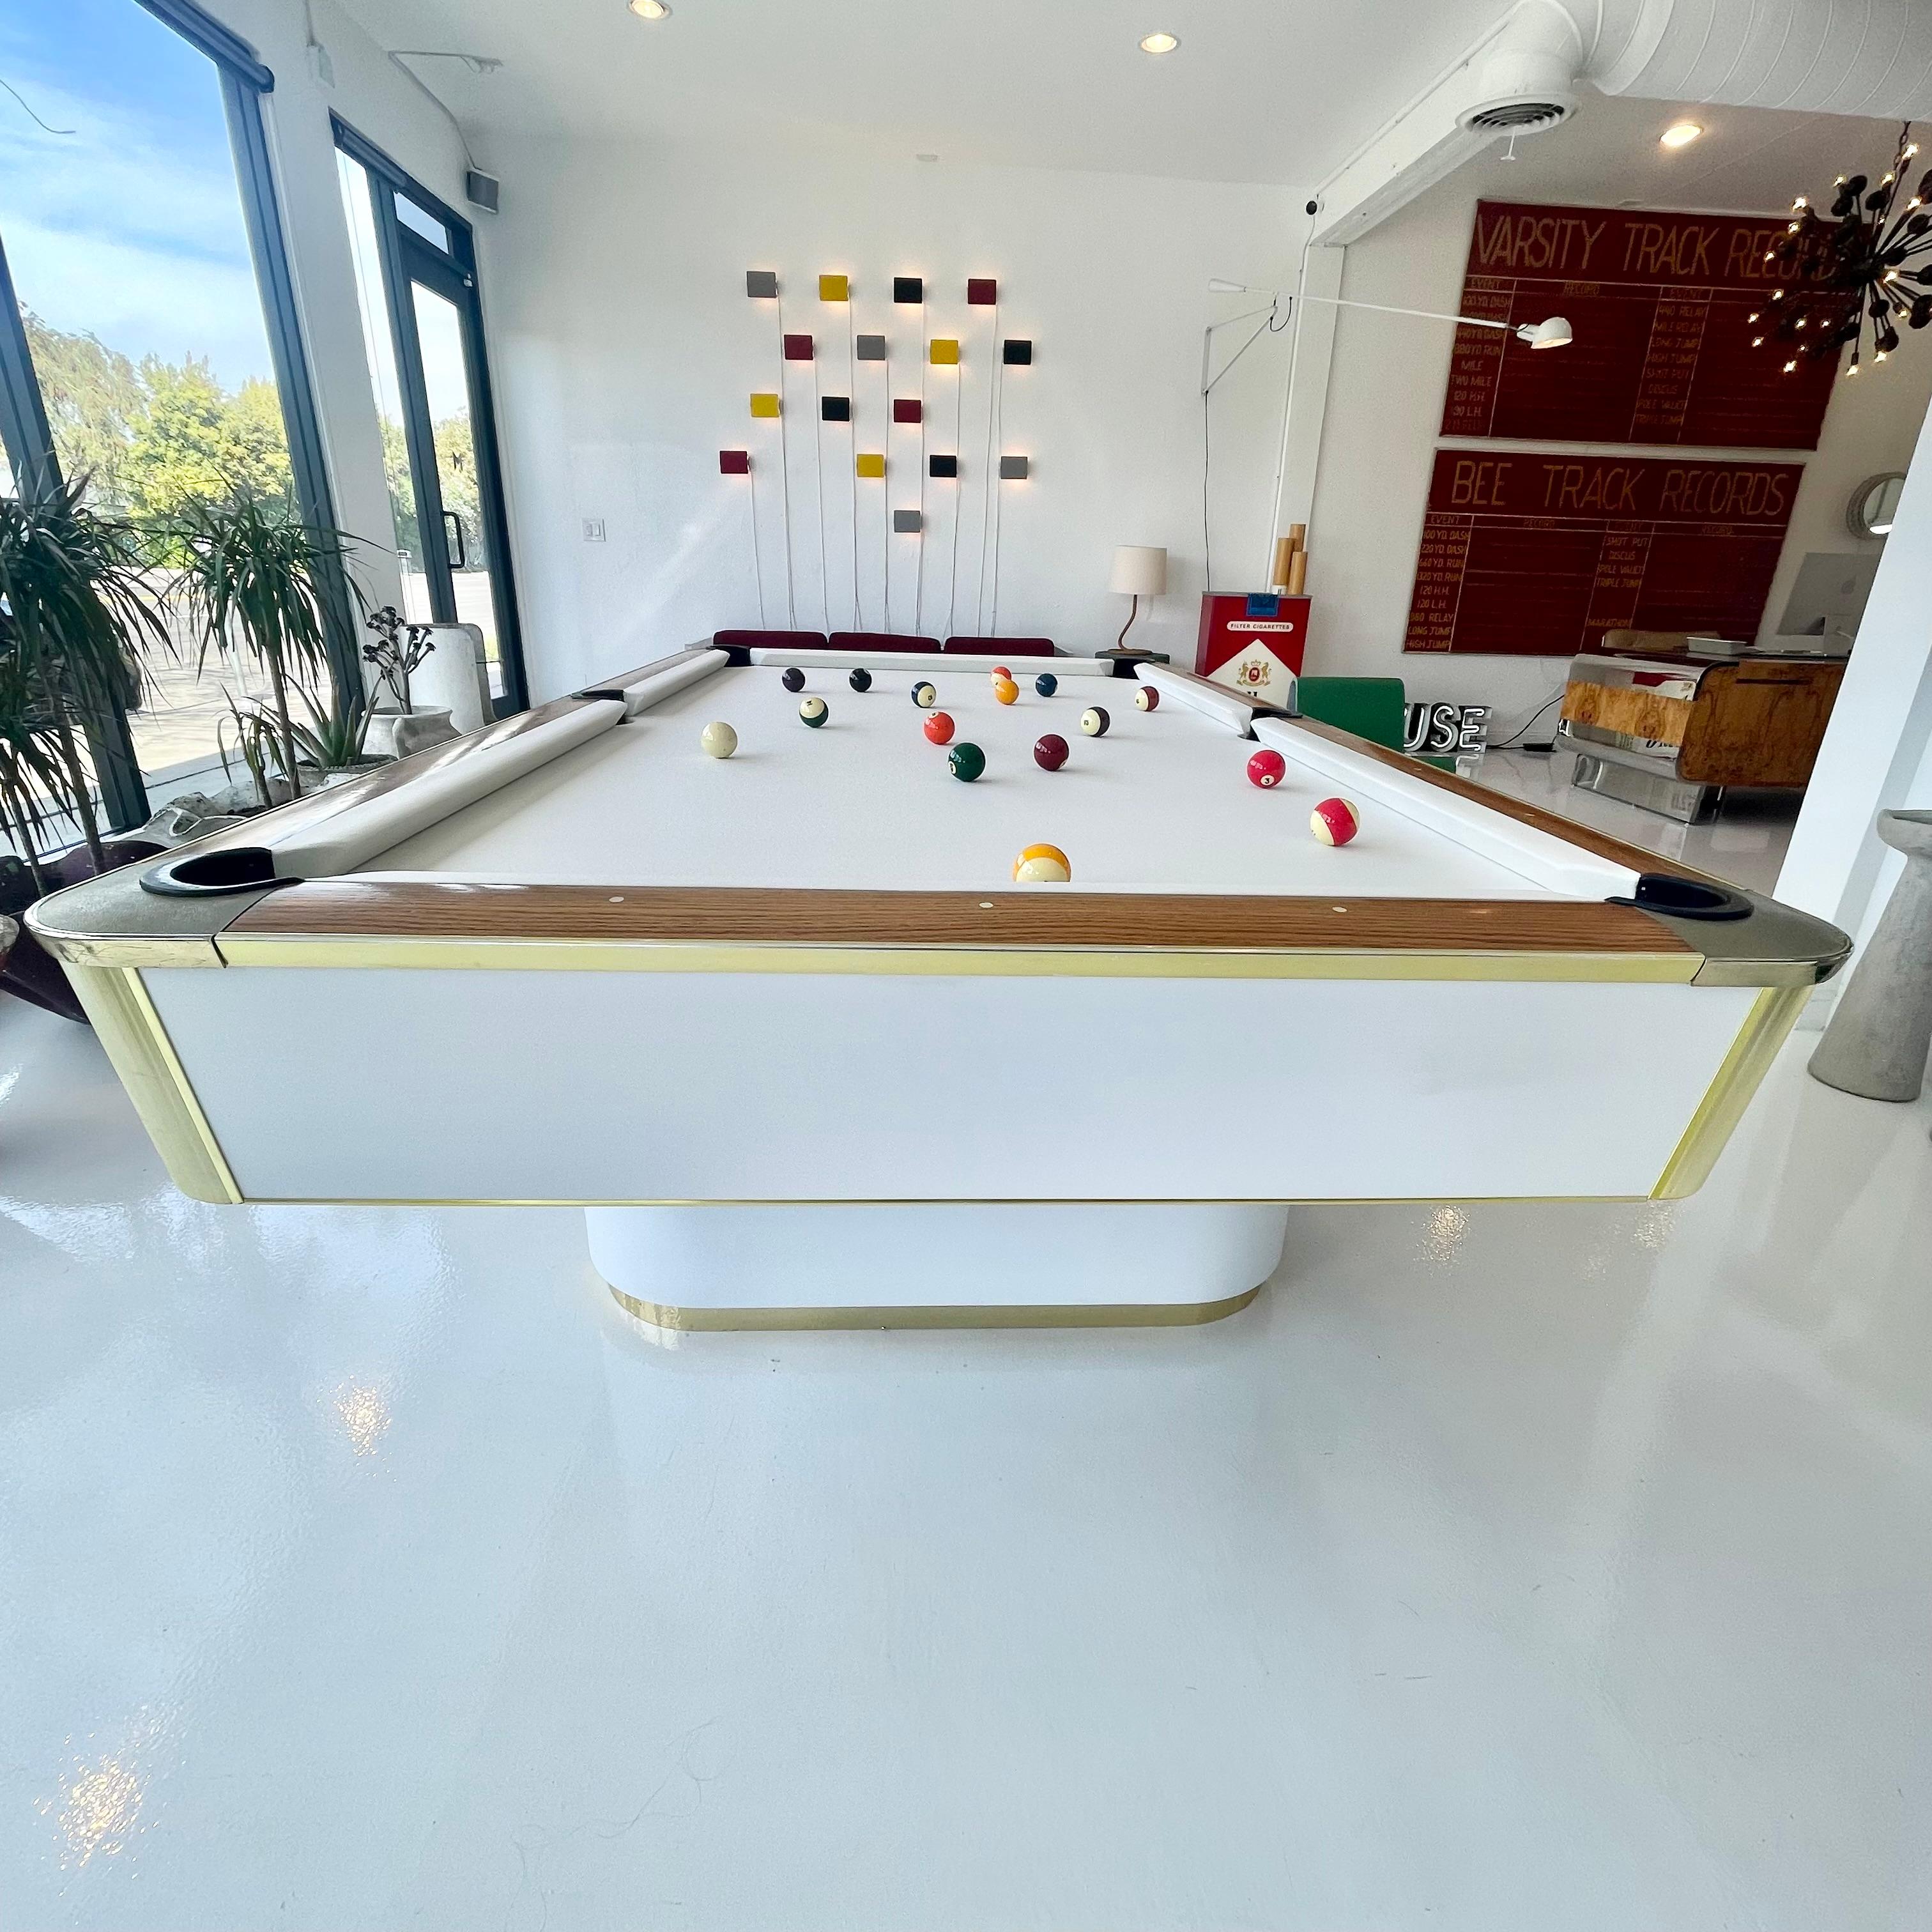 Elegant snow white and golden brass 1980s pool table by Murrey. Made in Los Angeles. Mother of pearl markers inlaid in Maple edges. Excellent condition to Formica panels. Beautiful dual pedestal design with brass trim, give this table a floating